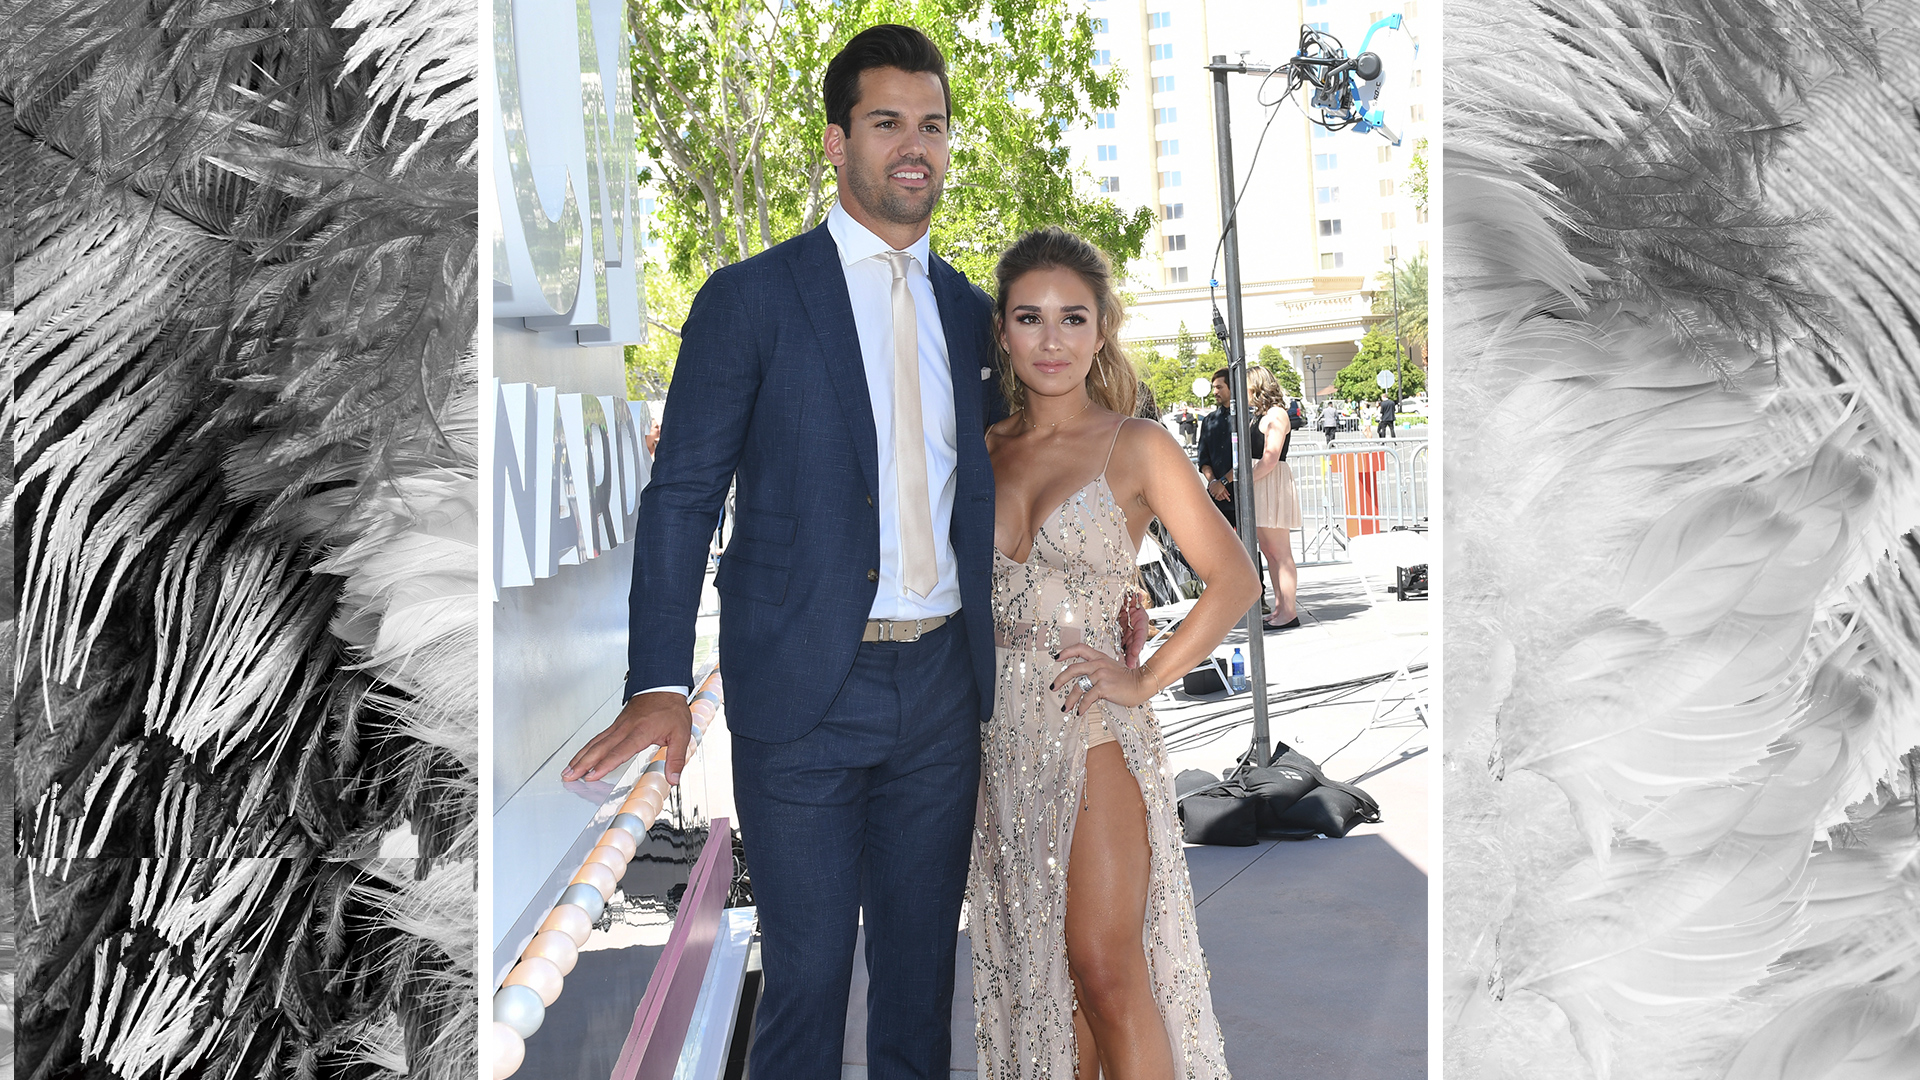 Singer Jessie James Decker cozies up with hubby and New York Jets wide receiver Eric Decker.